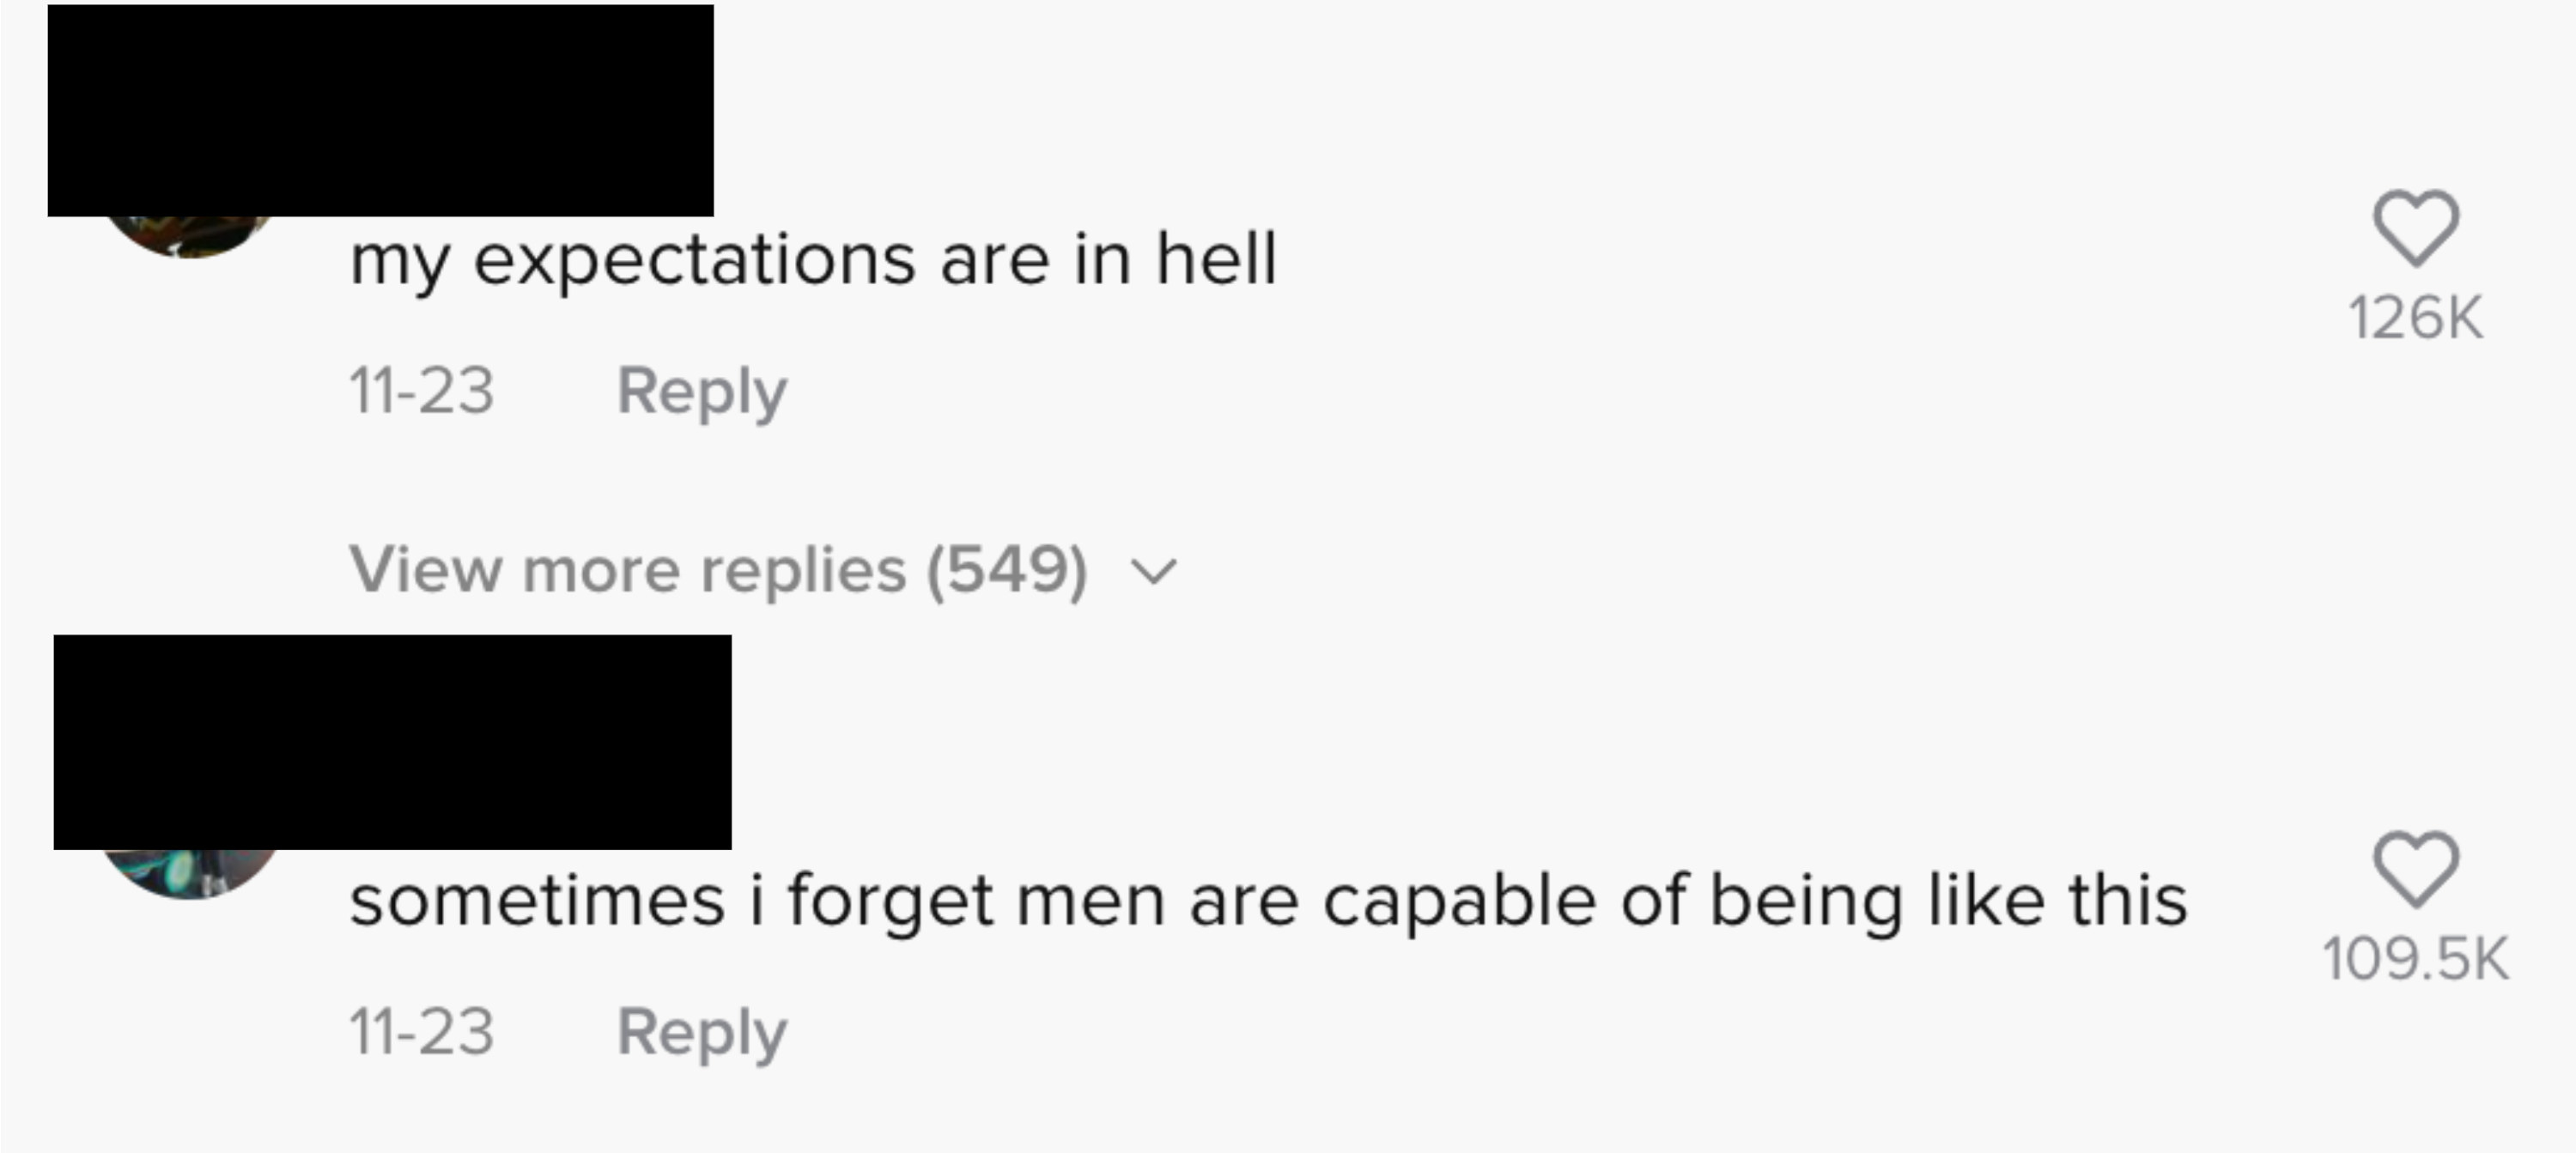 comments saying &quot;my expectations are hell&quot; and &quot;sometimes i forget men are capable of being like this&quot;